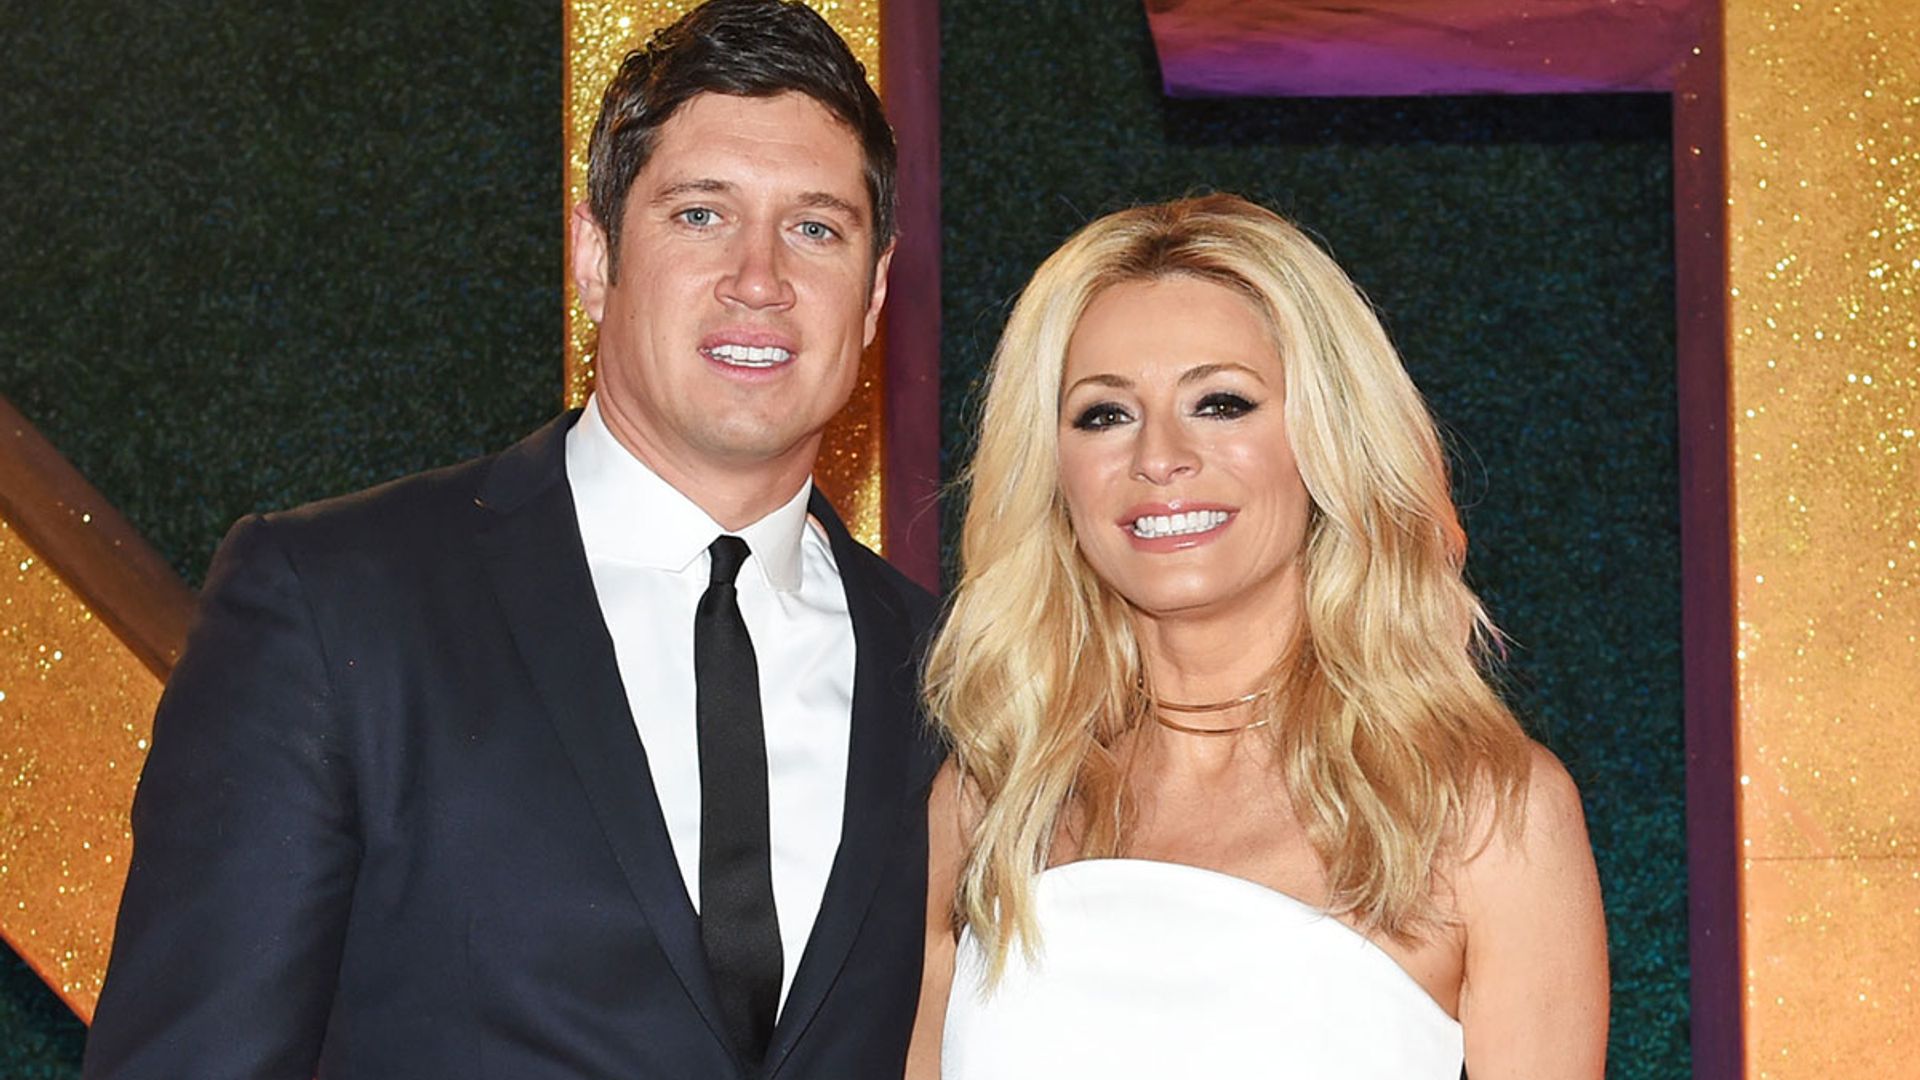 Strictly's Tess Daly looks ageless in rare wedding photos with Vernon Kay